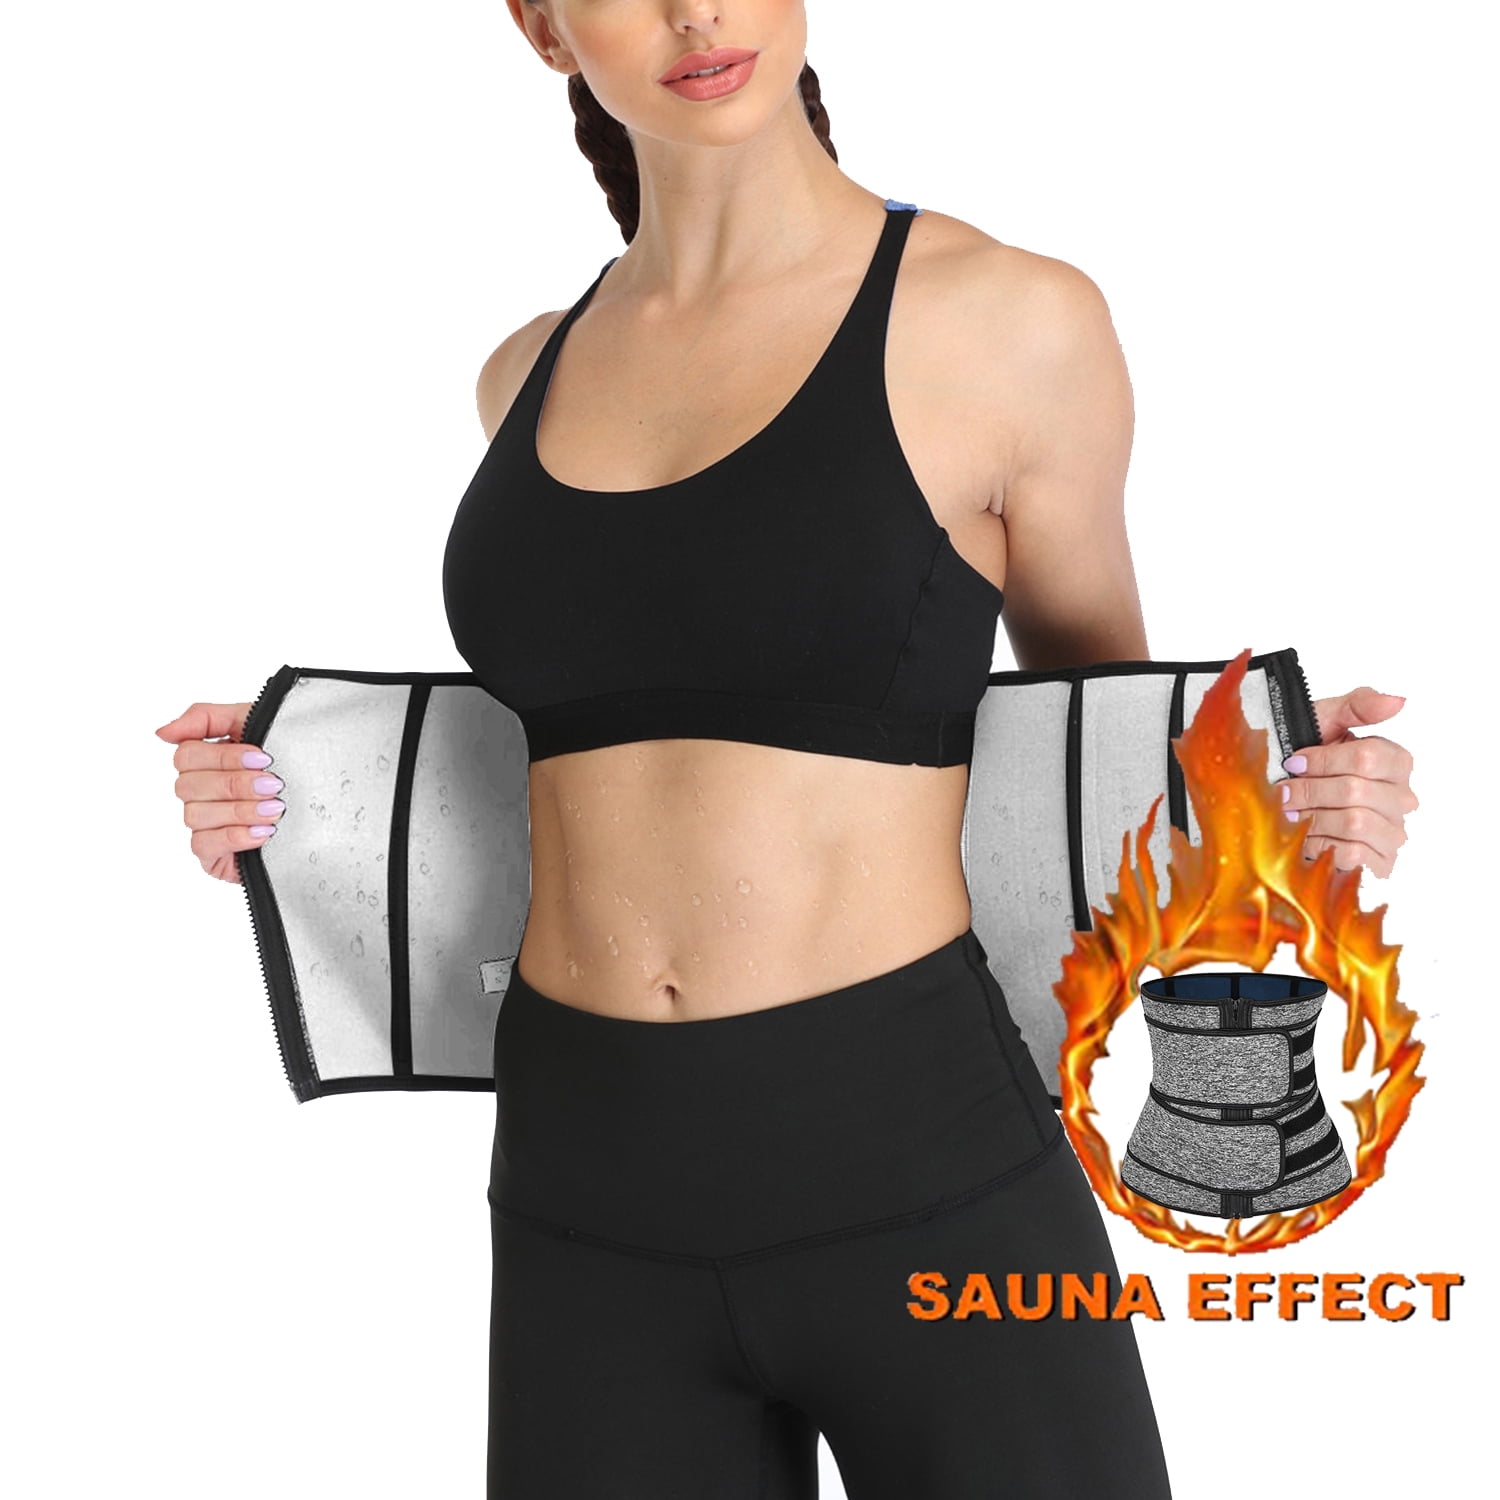 Details about   Neoprene Arm Trimmers Sauna Sweat Band for Women Men Weight Loss Exercise Shaper 